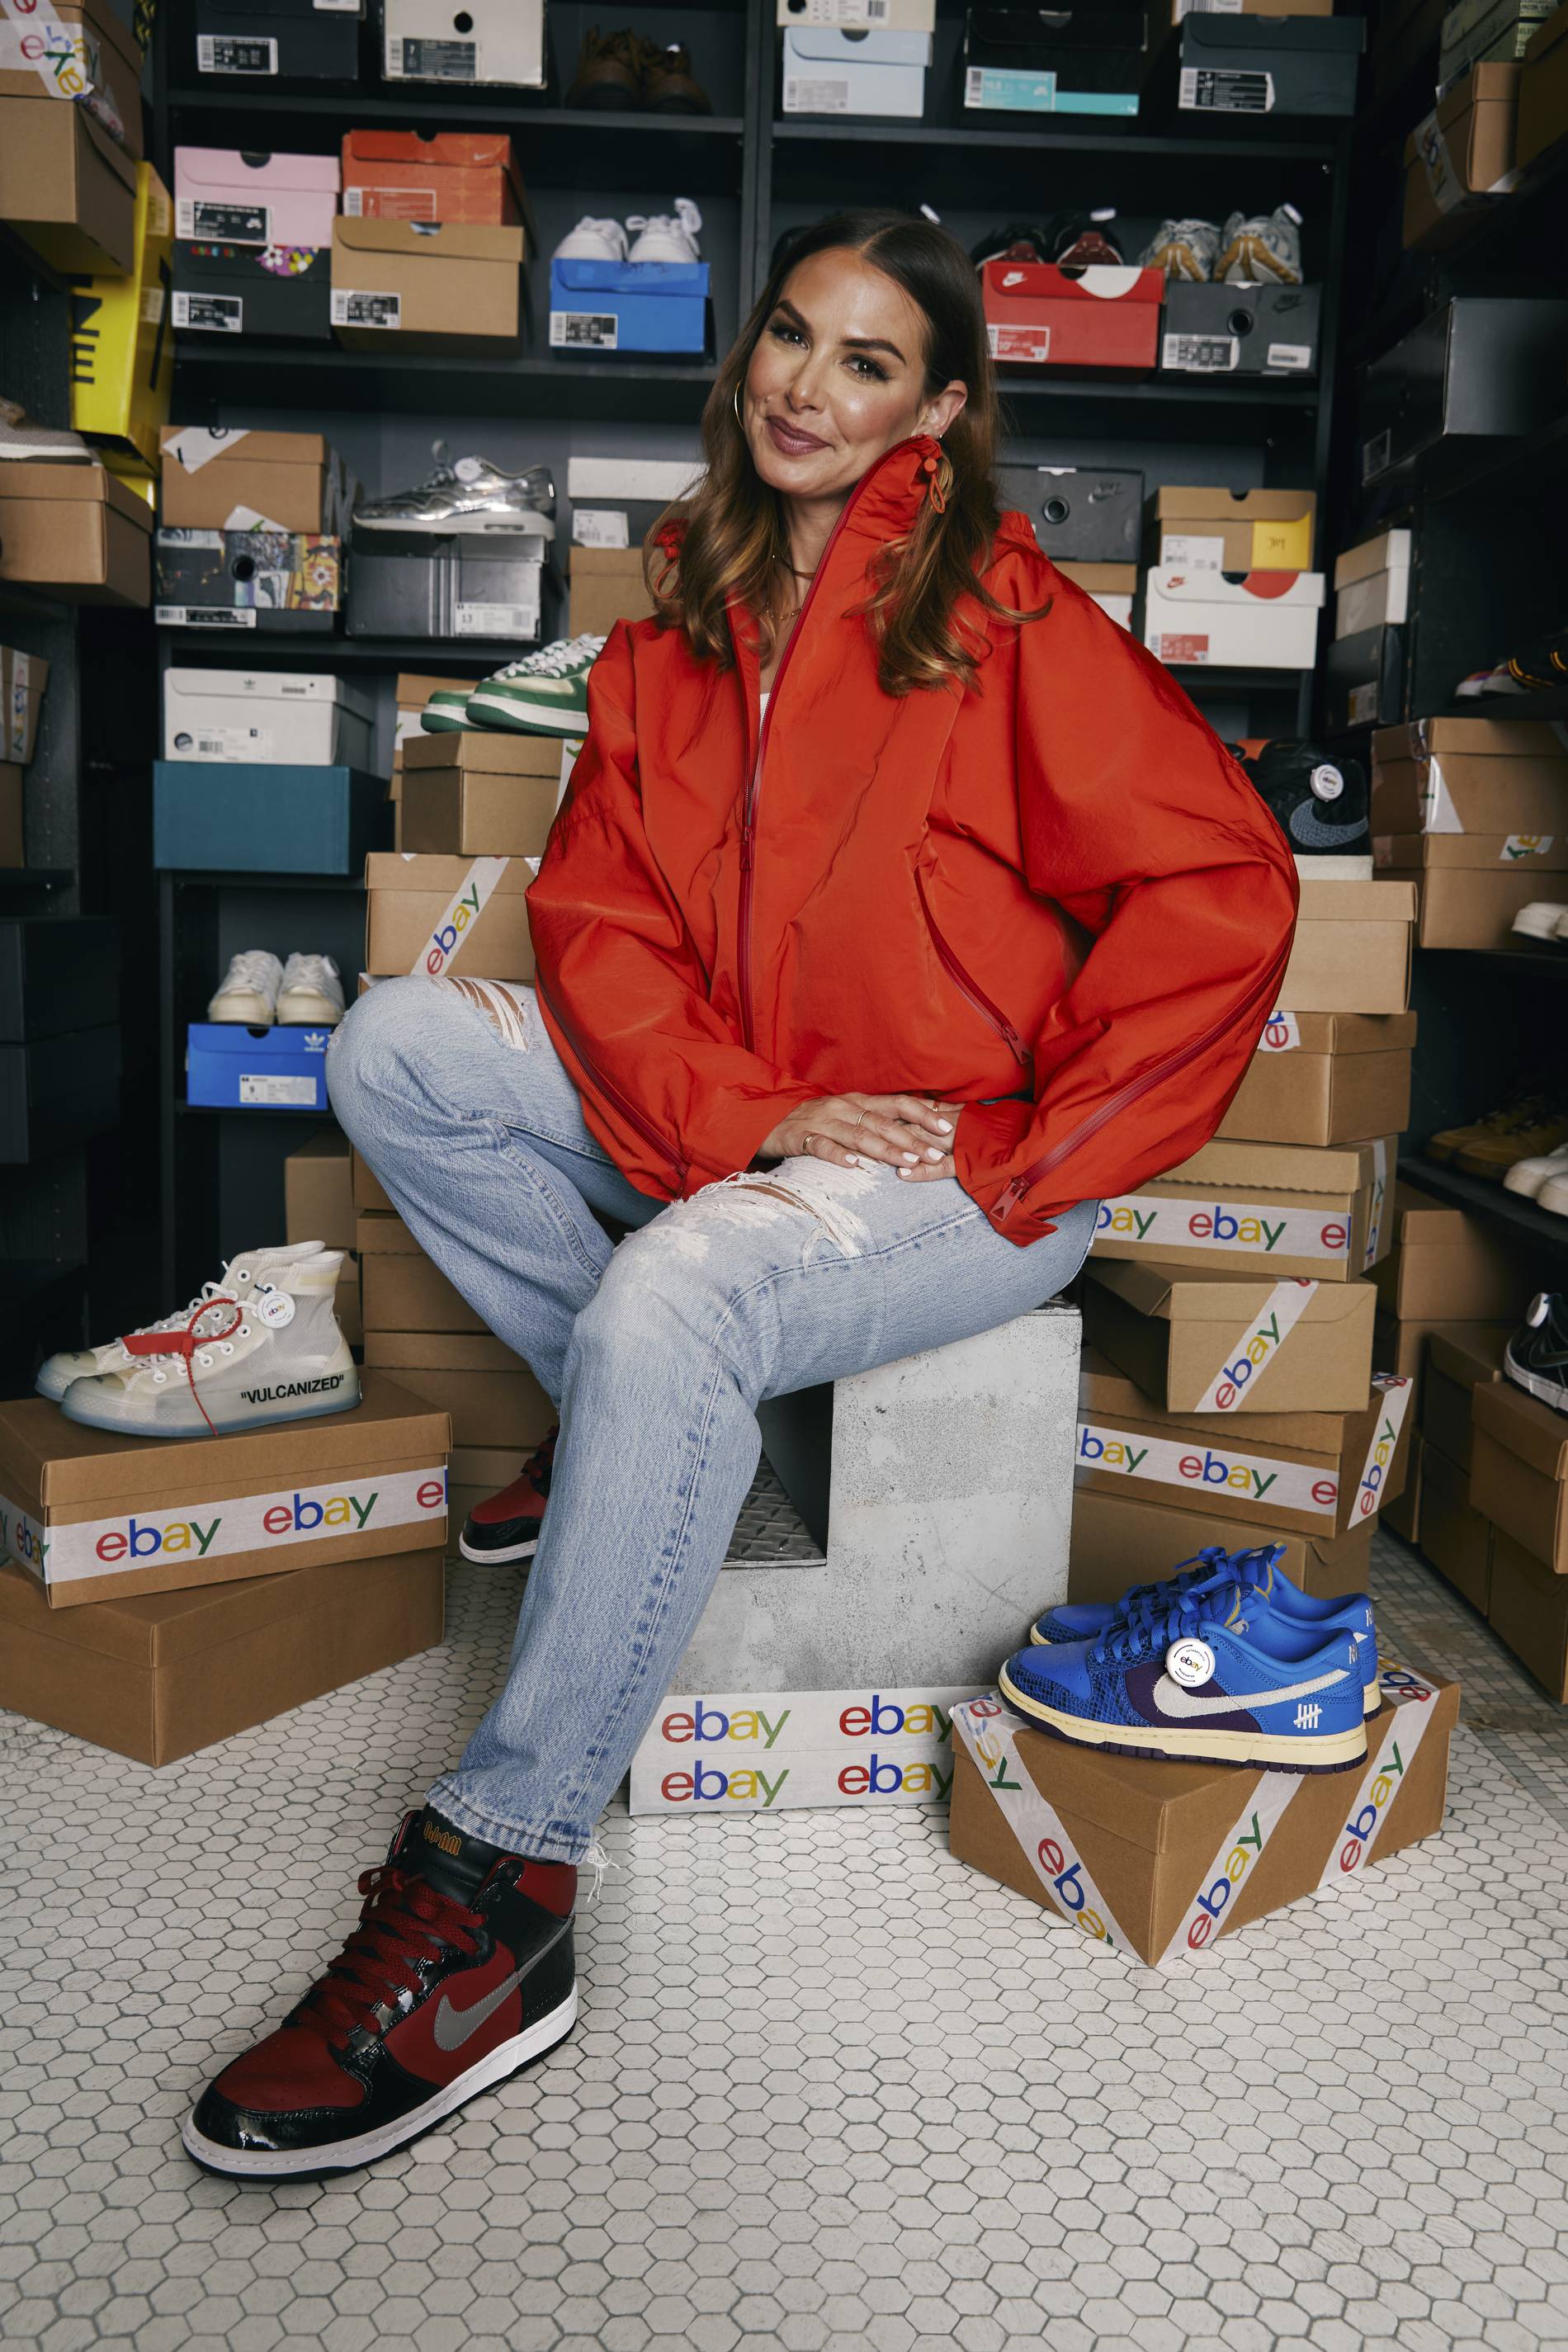 Joy Claire poses with her sneaker collection, going up for auction on eBay